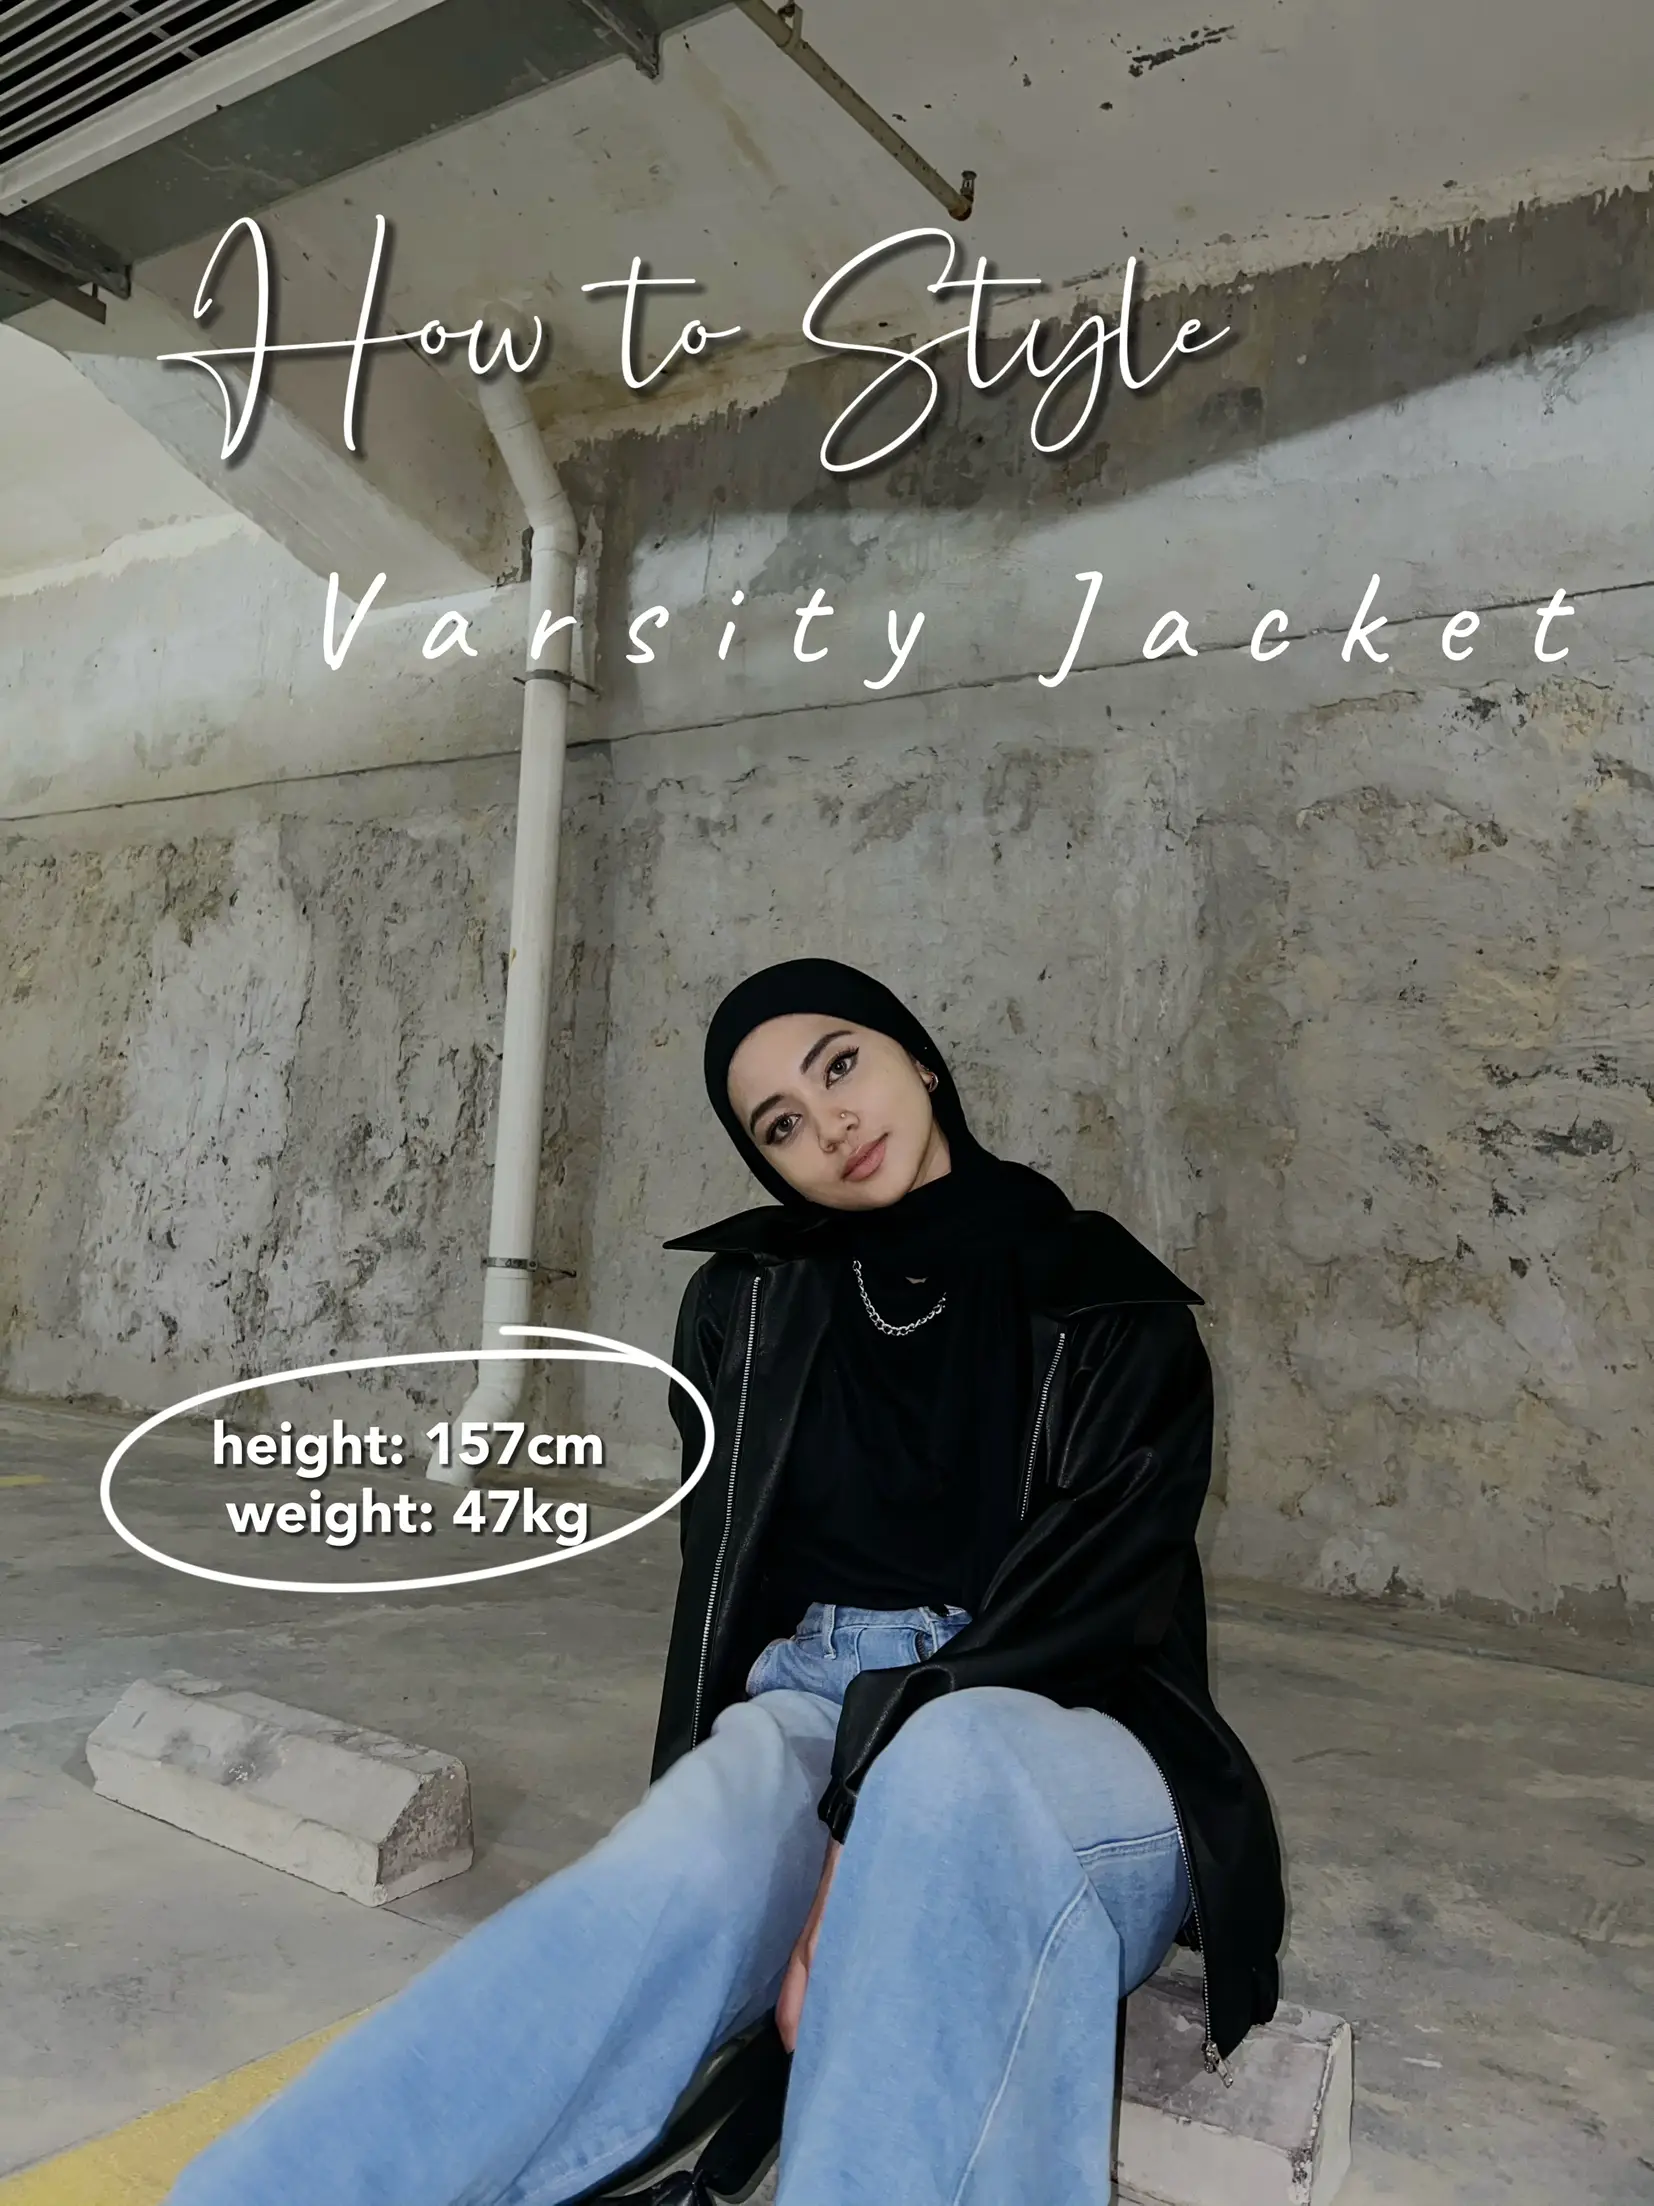 varsity jacket outfit idea, Gallery posted by yonmiin